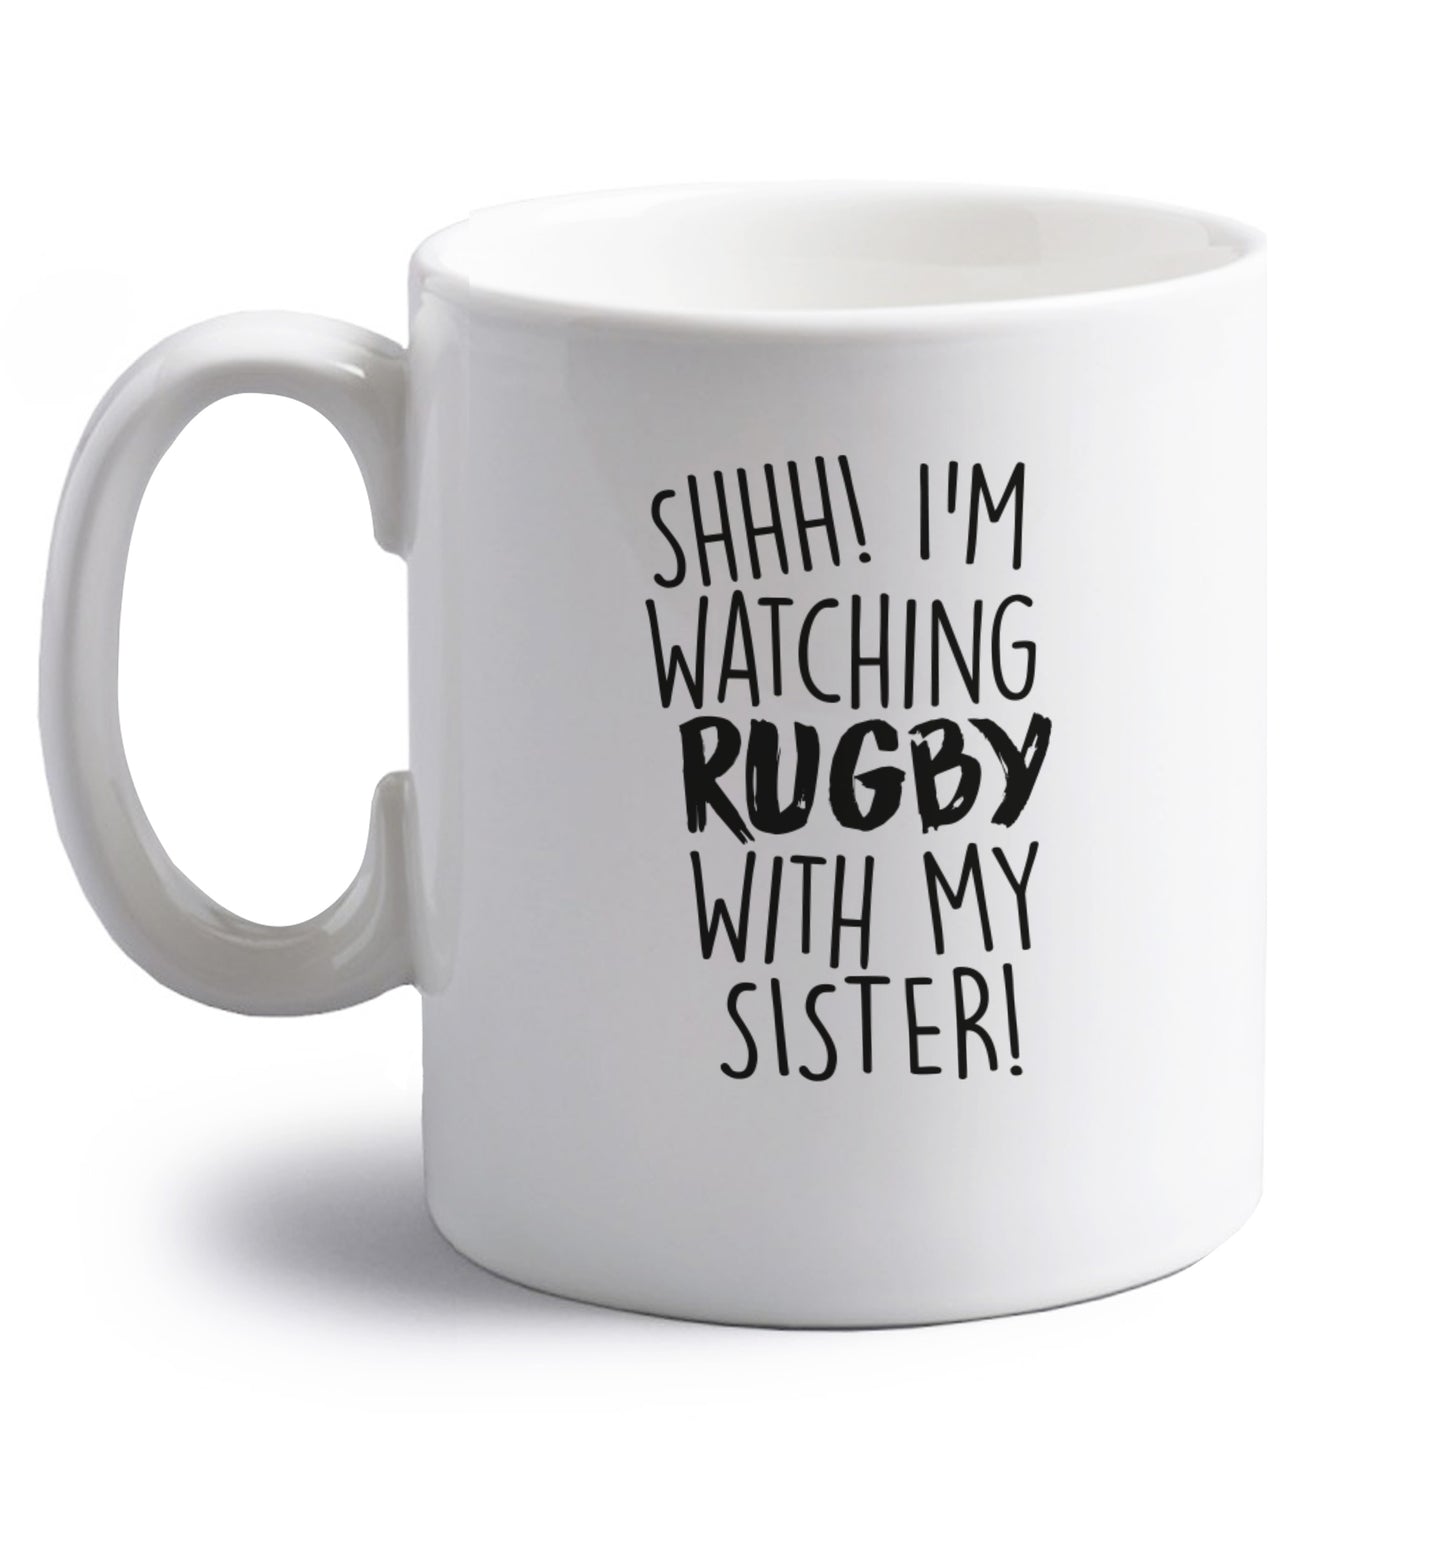 Shh... I'm watching rugby with my sister right handed white ceramic mug 